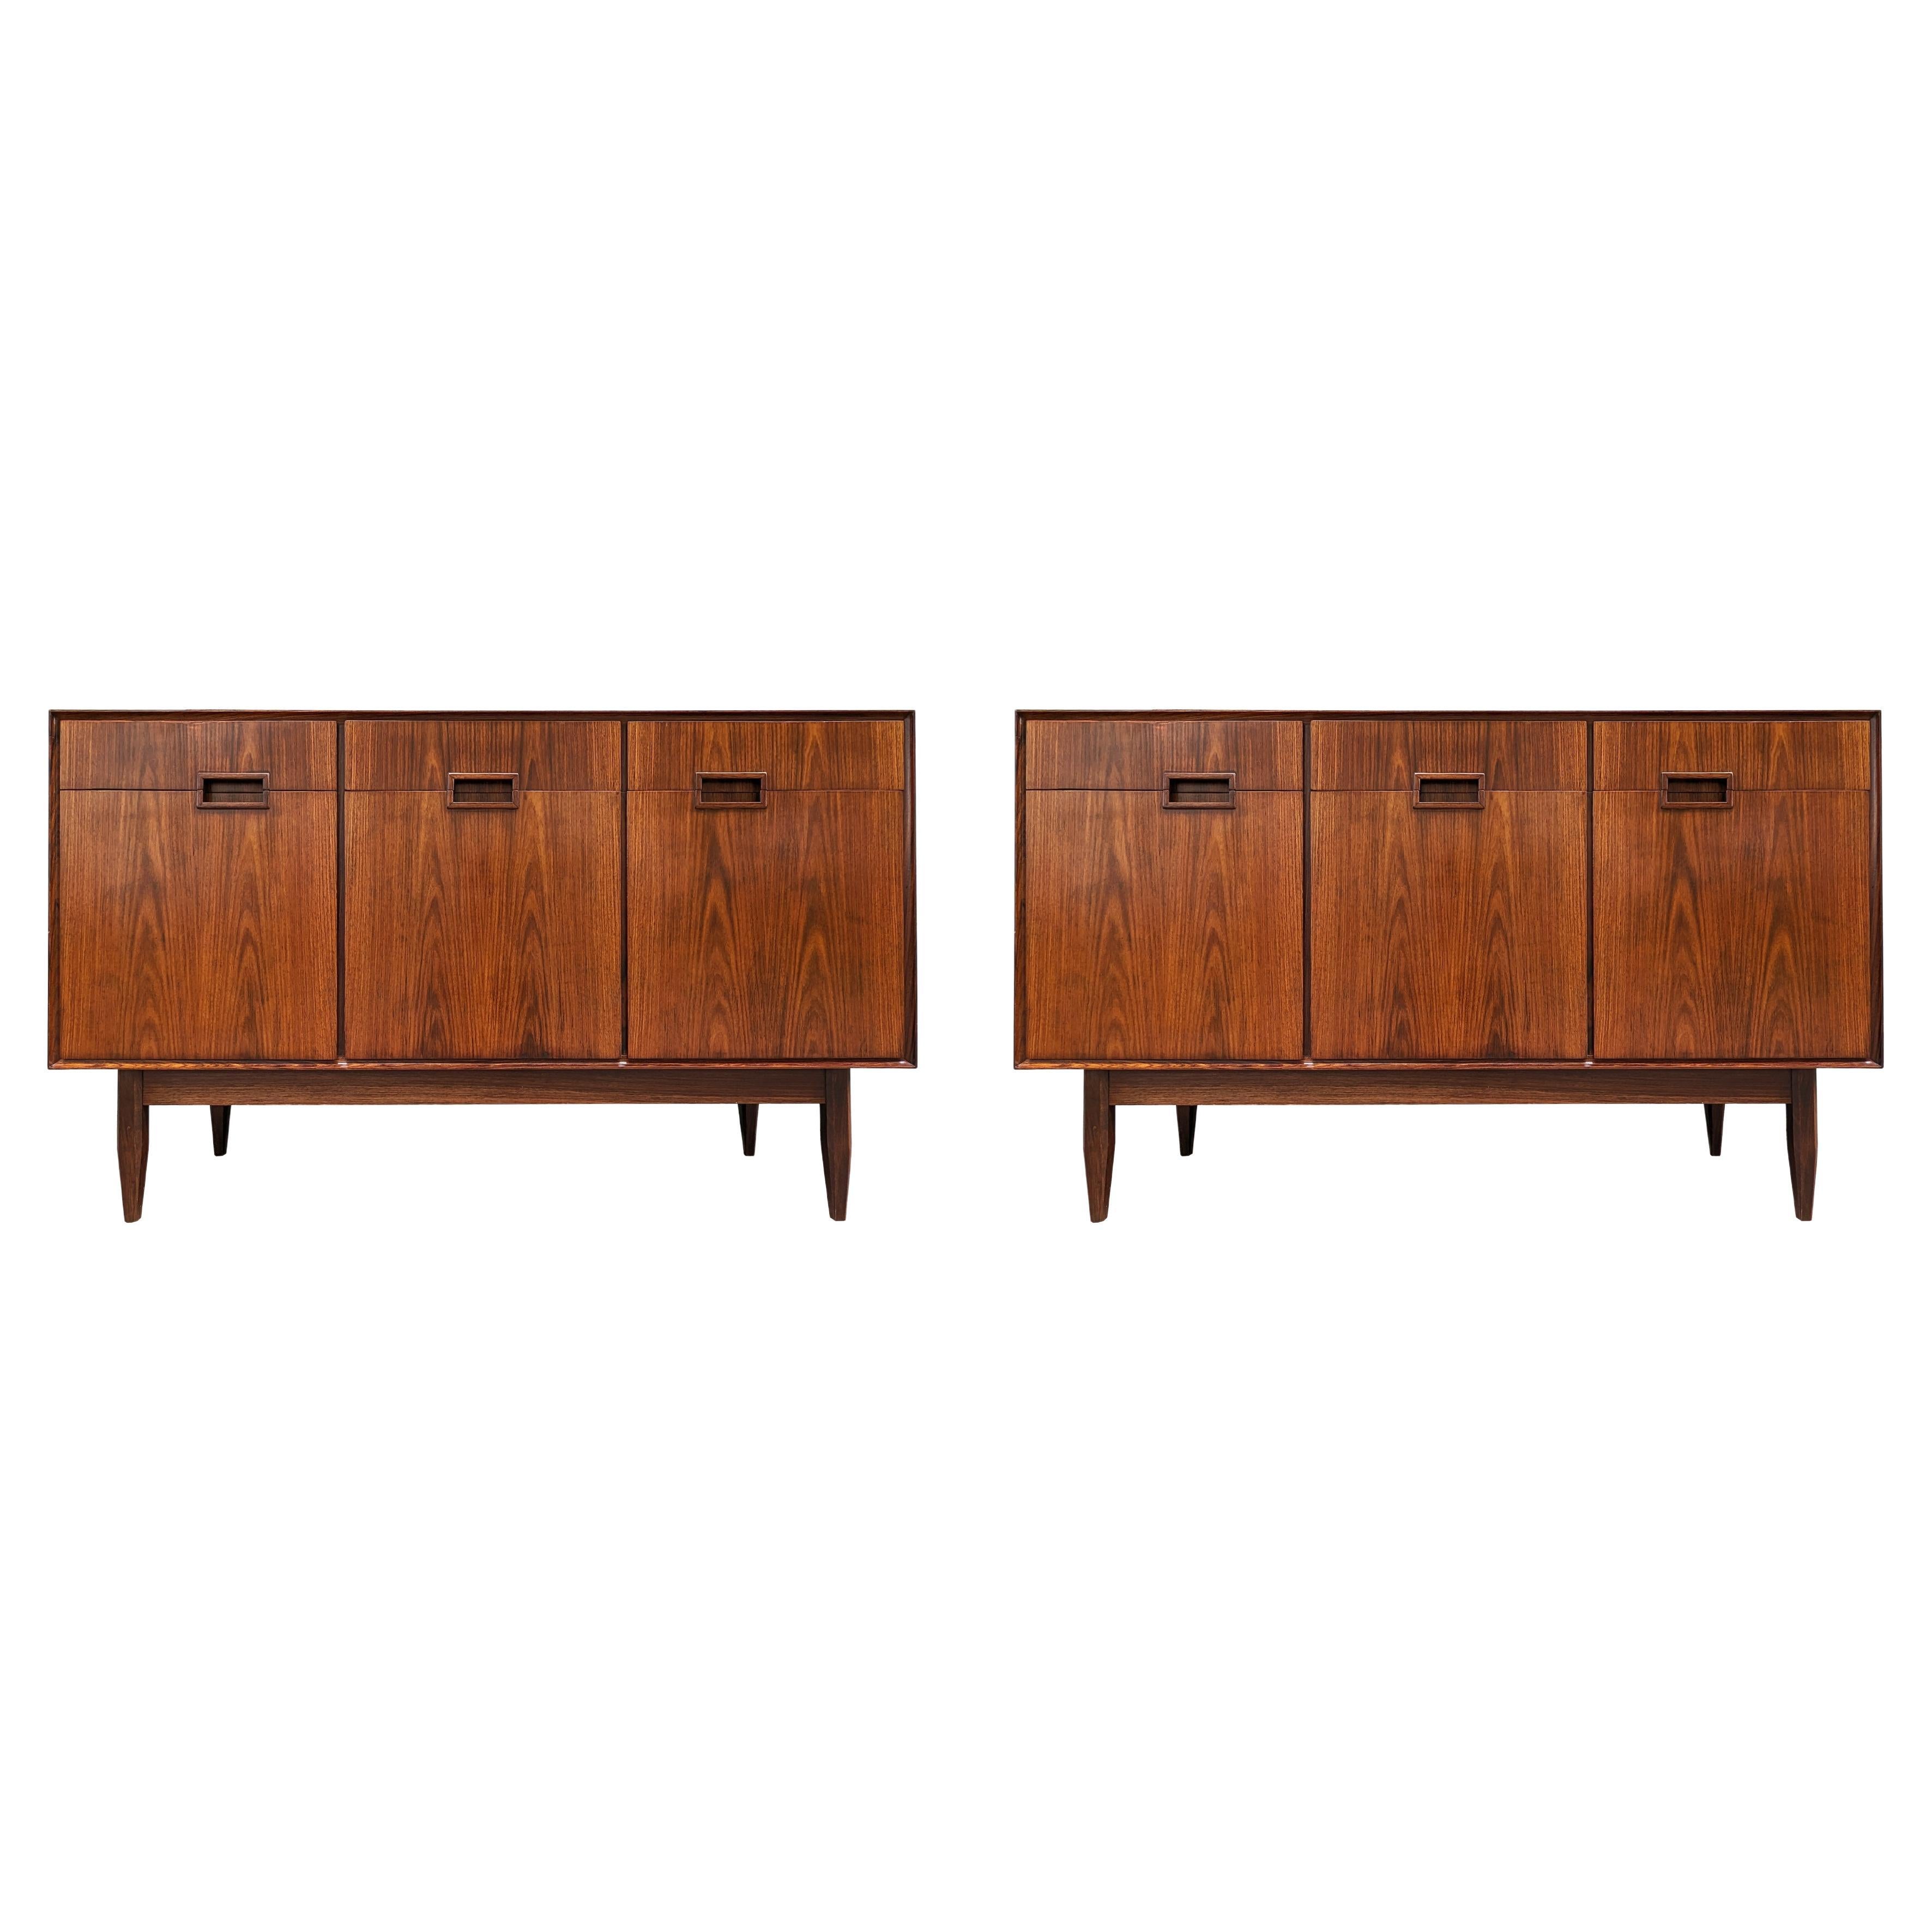 Italian Wooden Mid Century Modern Sideboards in the style of Dassi, set of 2 For Sale